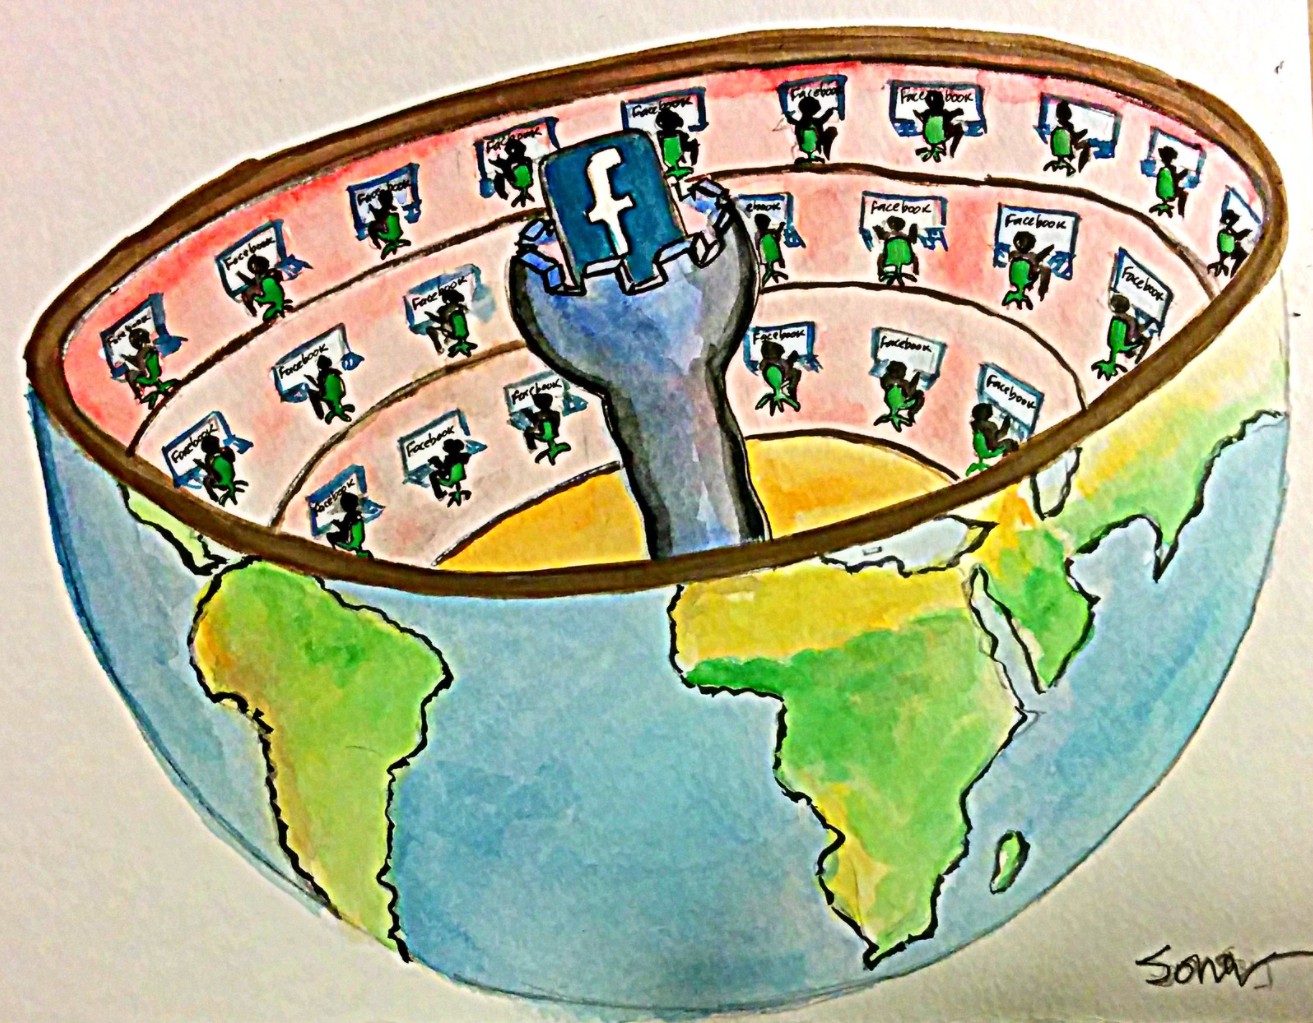 "Facebook as imagined by Jeremy Bentham: The Panopticon of Modern Age" by iLifeinicity C BY 2.0